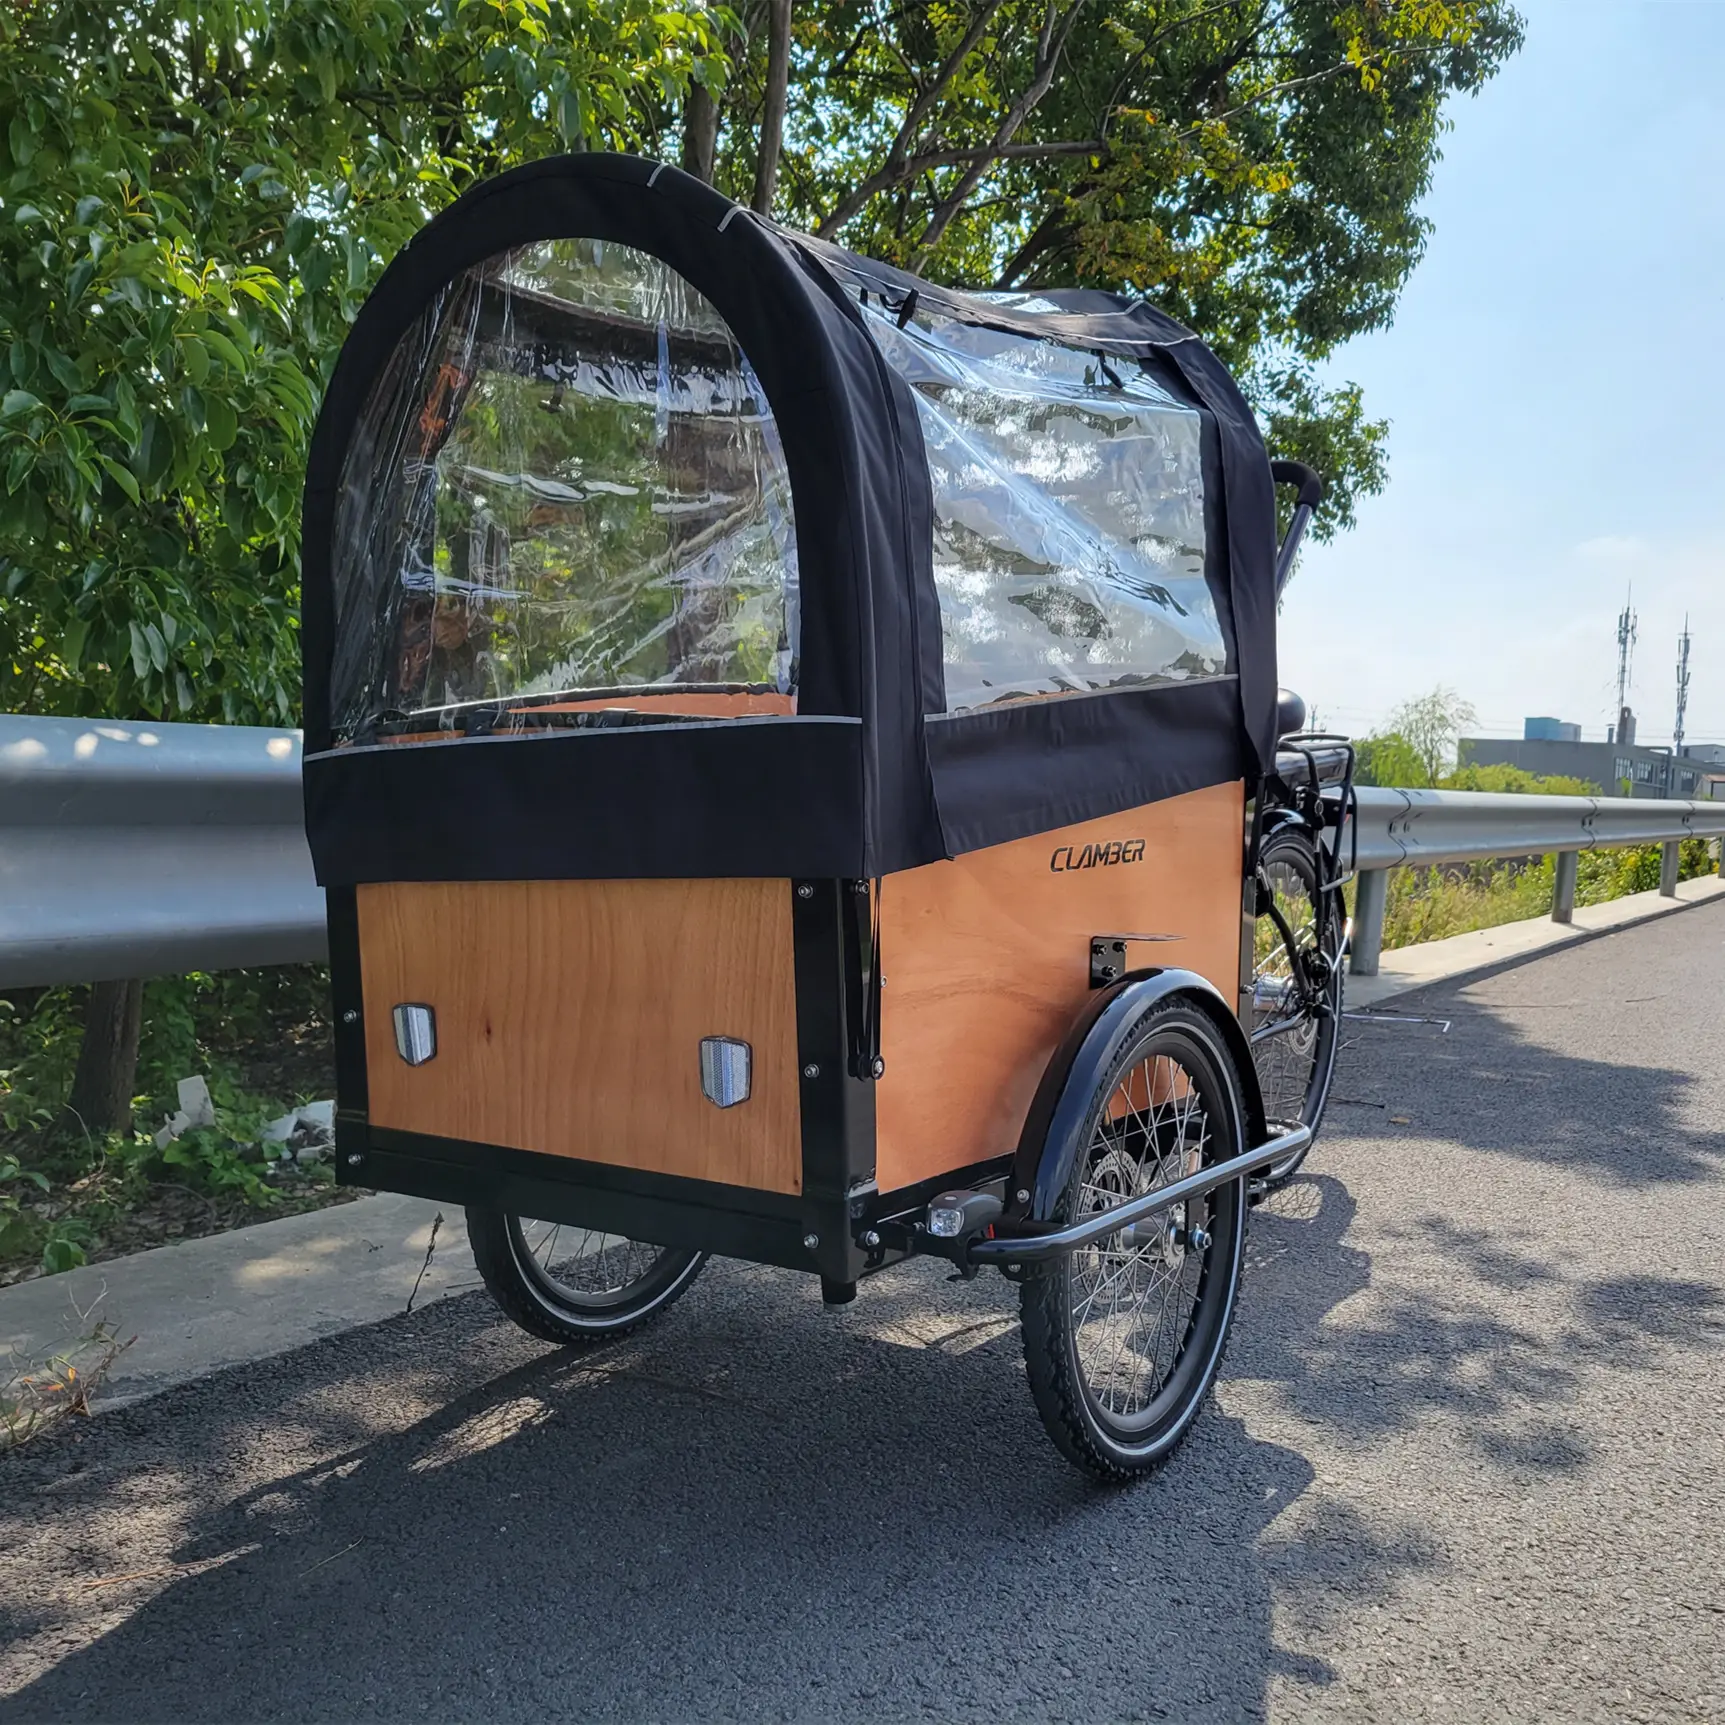 Dutch electric cargo trike europe warehouse electric cargo bike front wood box 3 wheel tricycle pedal assist